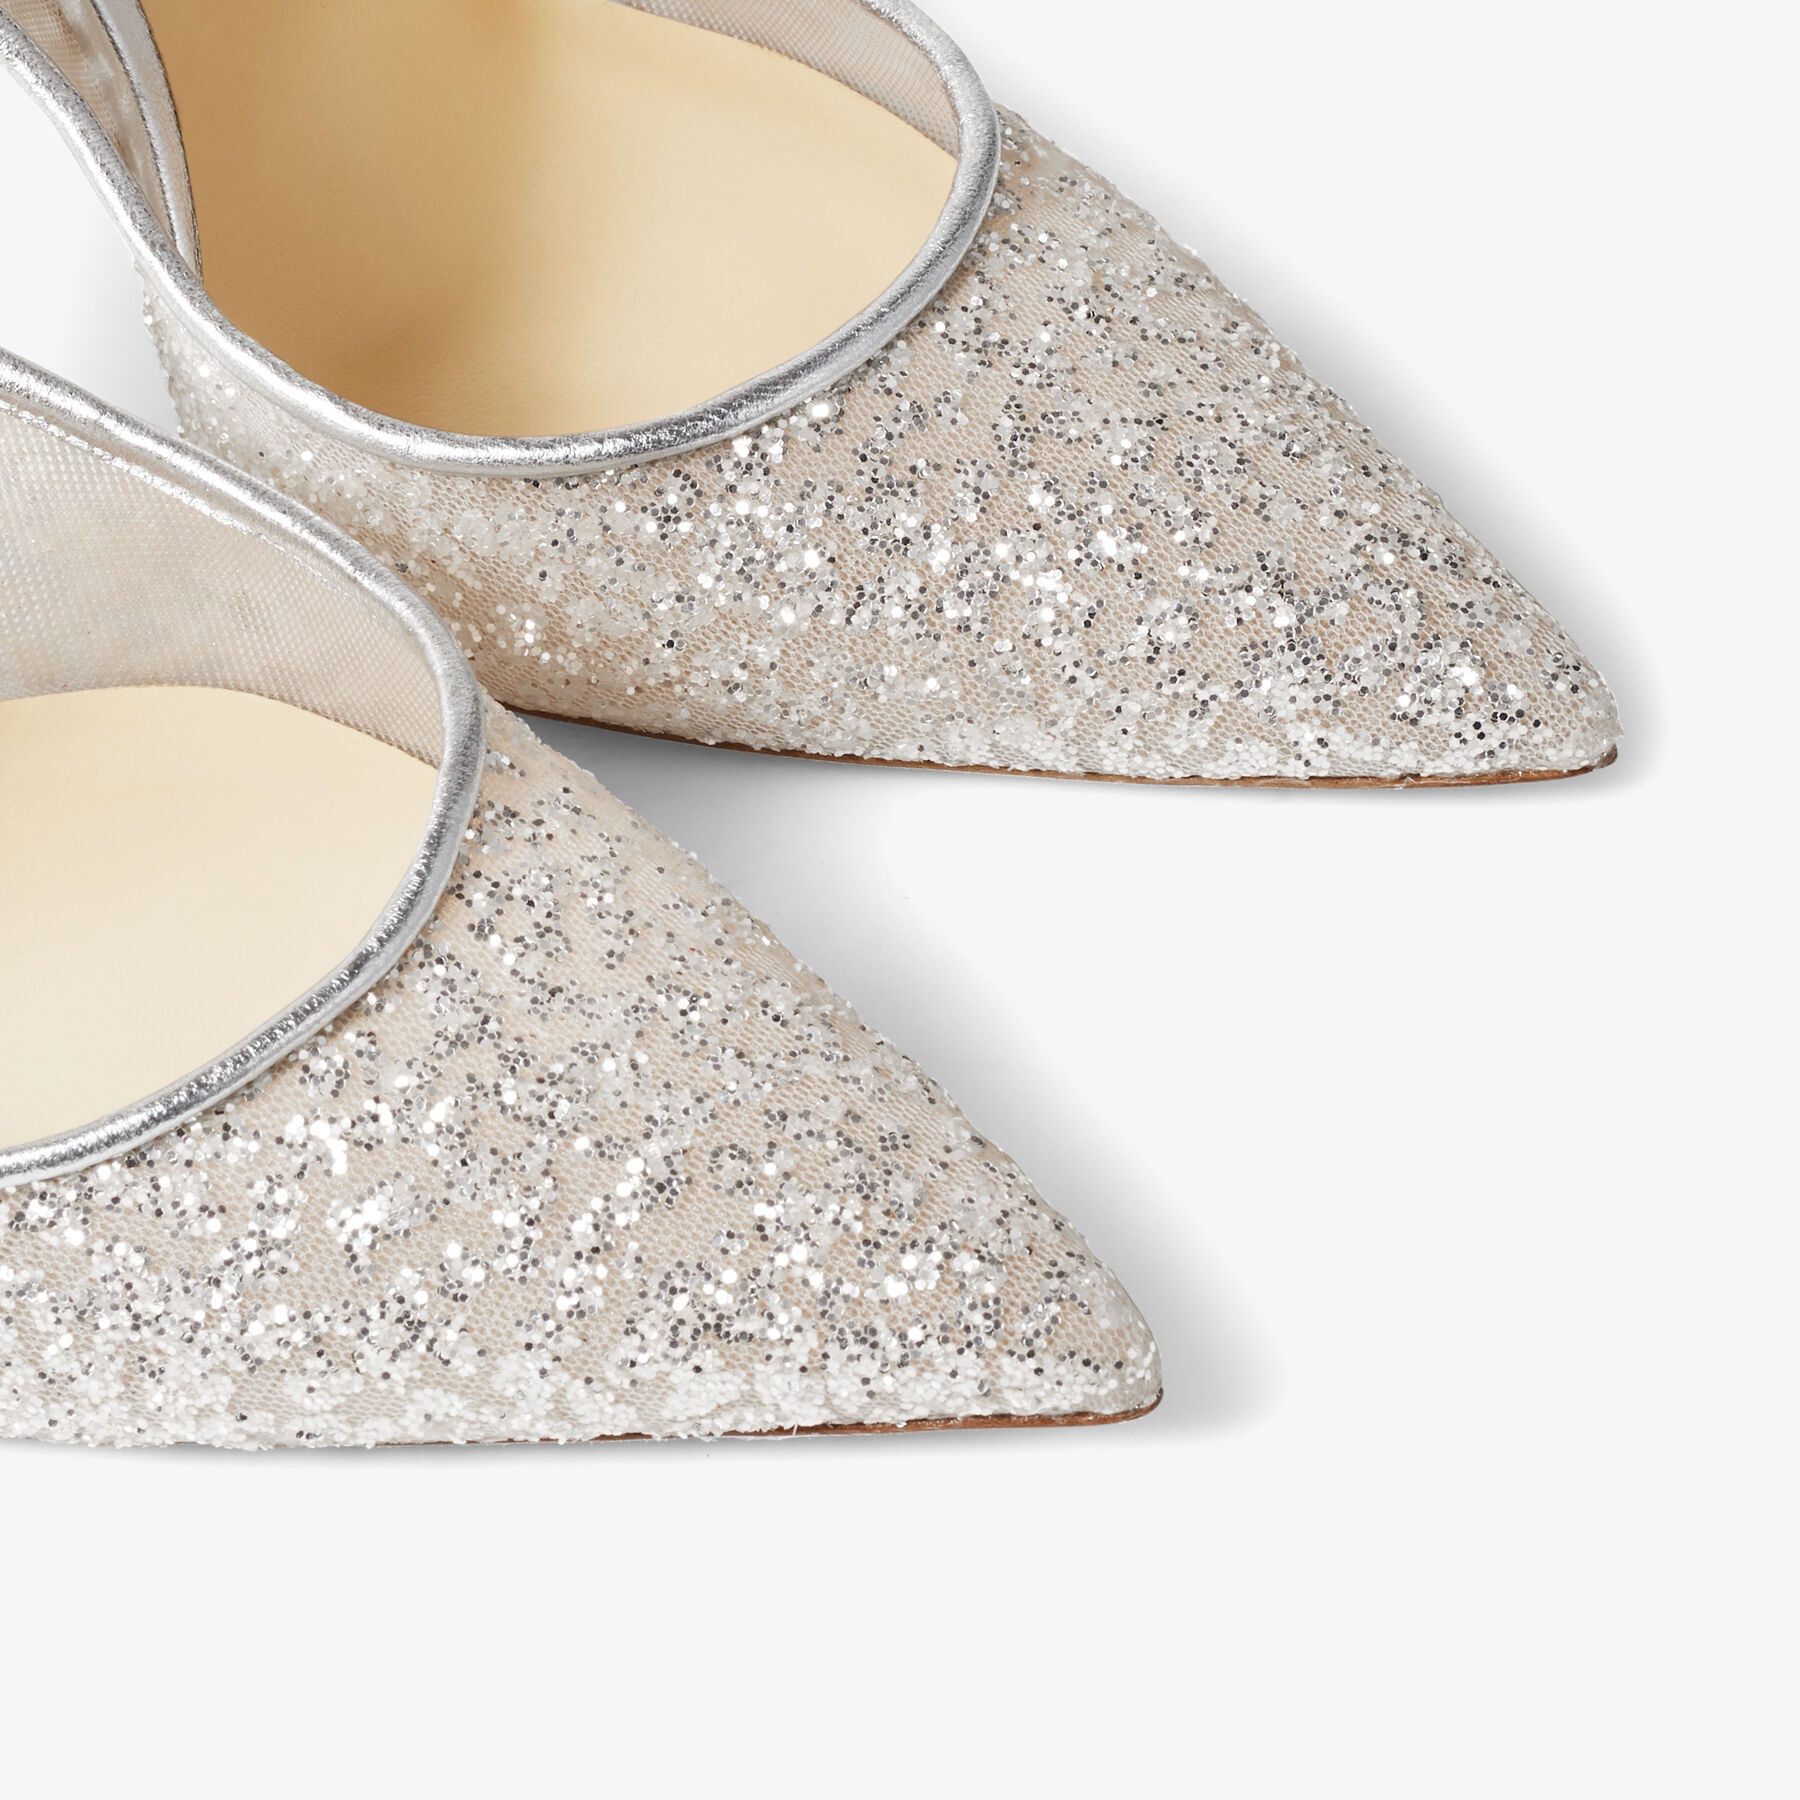 Bing 100
Silver Glitter Tulle Mules with Crystal Strap - 5